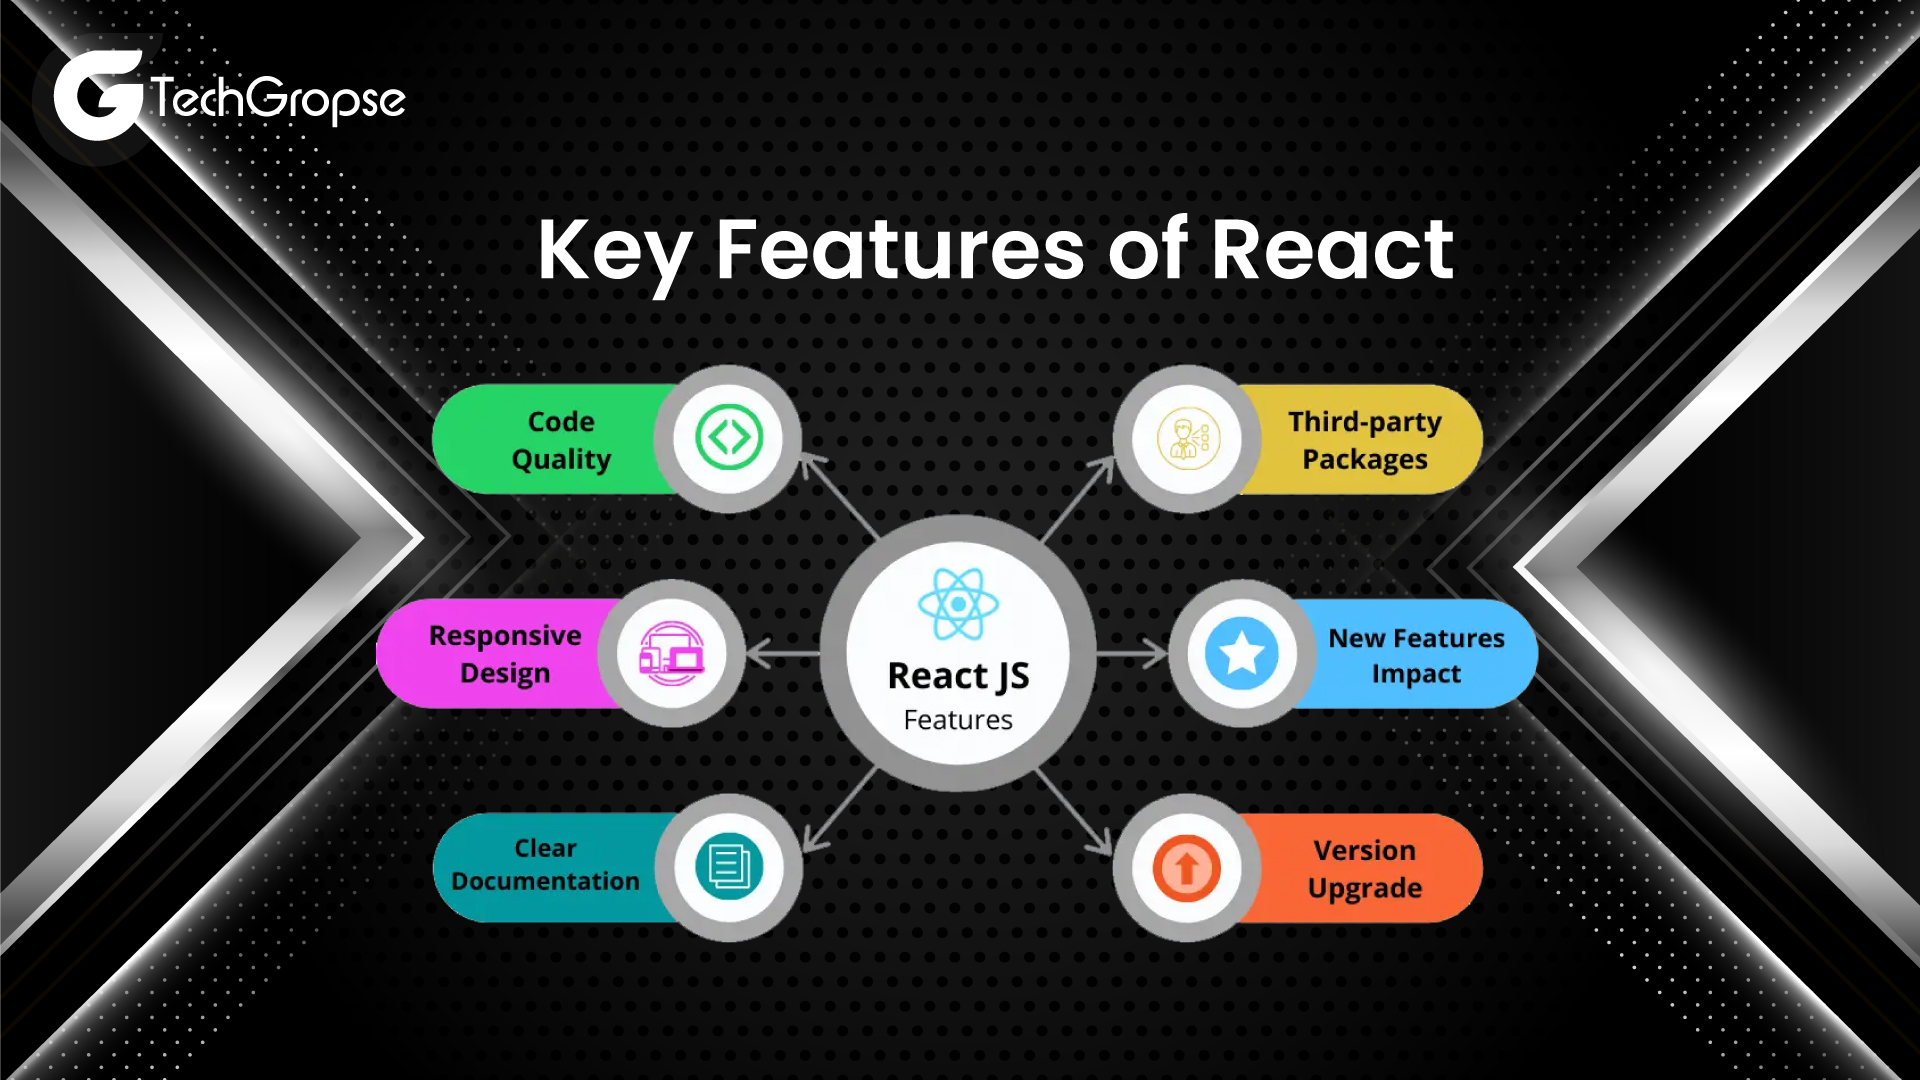 Key Features of React